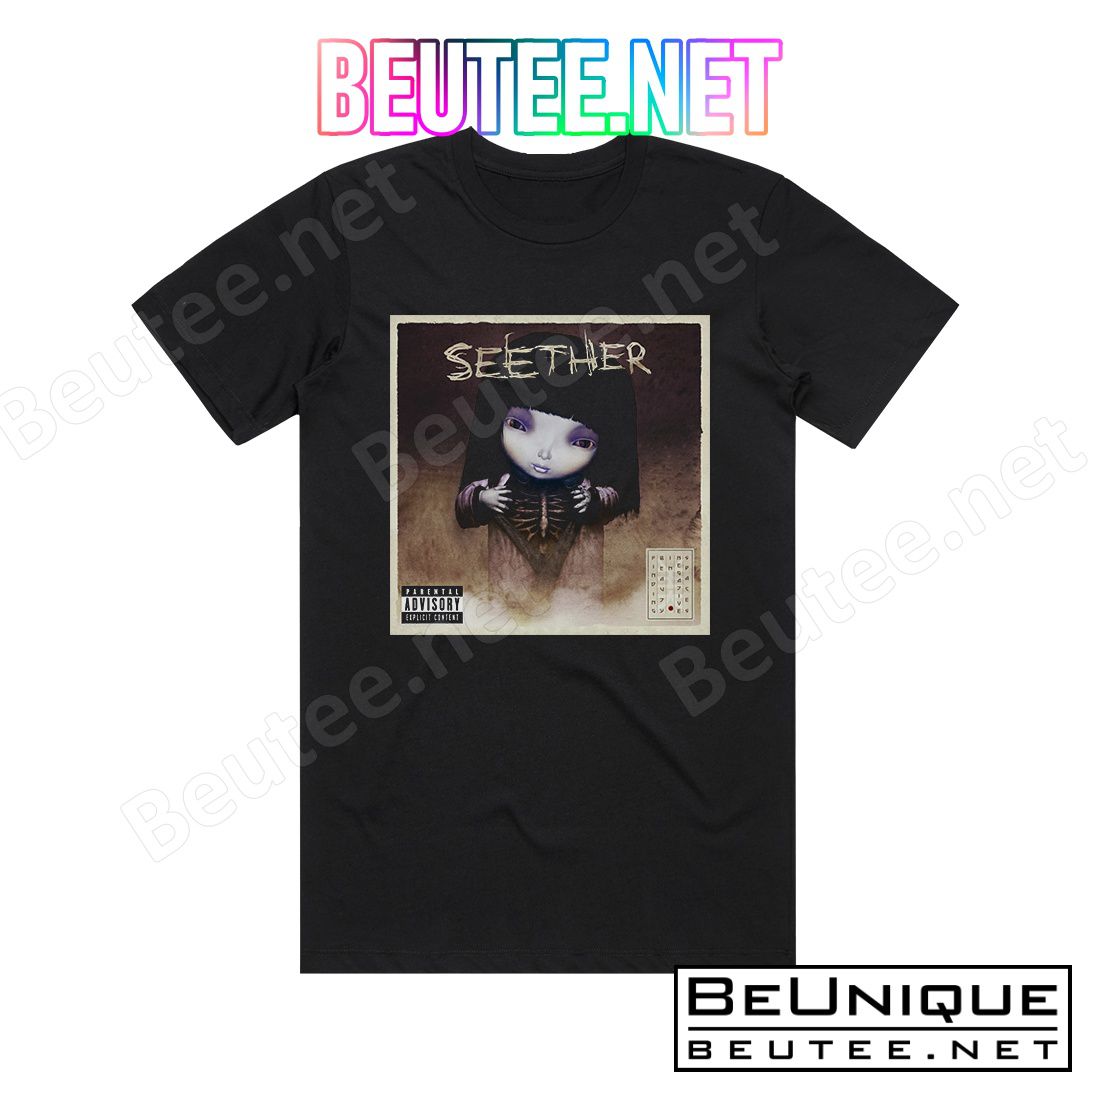 Seether Finding Beauty In Negative Spaces 2 Album Cover T-Shirt